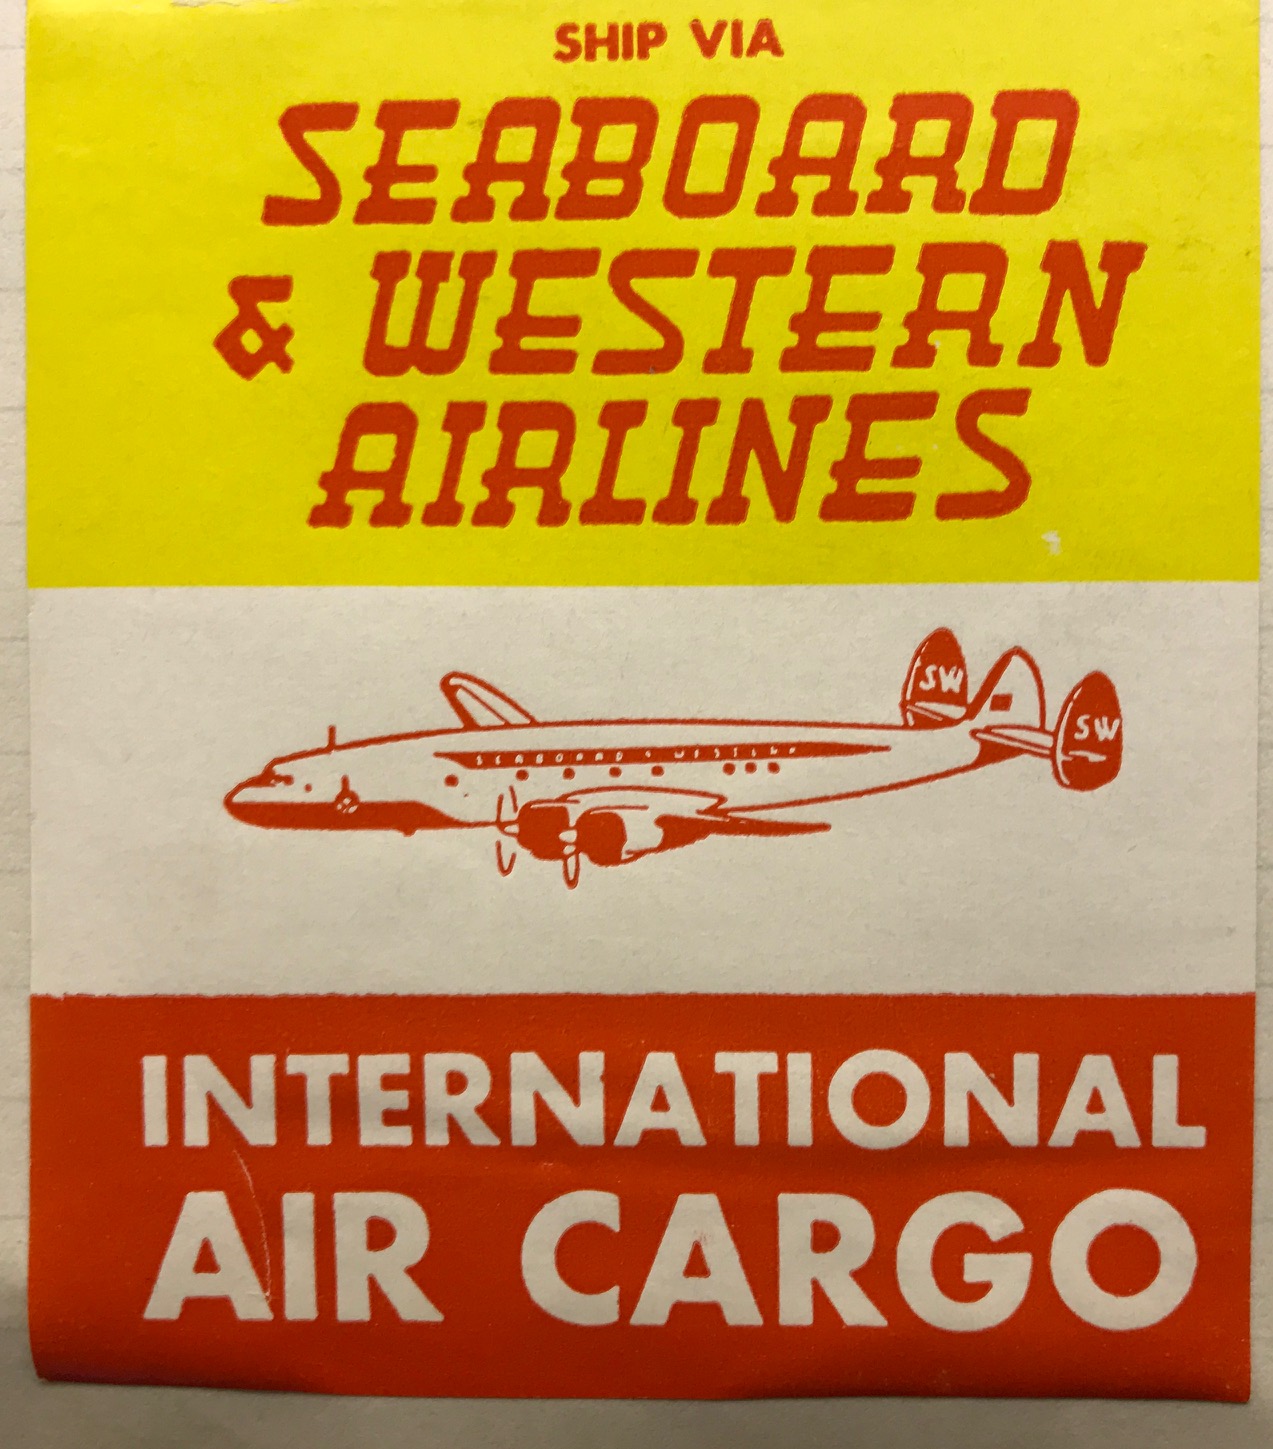 Trevor's Stickies: Seaboard & Western Airlines was founded in 1946. Taken over by Flying Tiger Line in 1980. Eventually became part of FedEx.